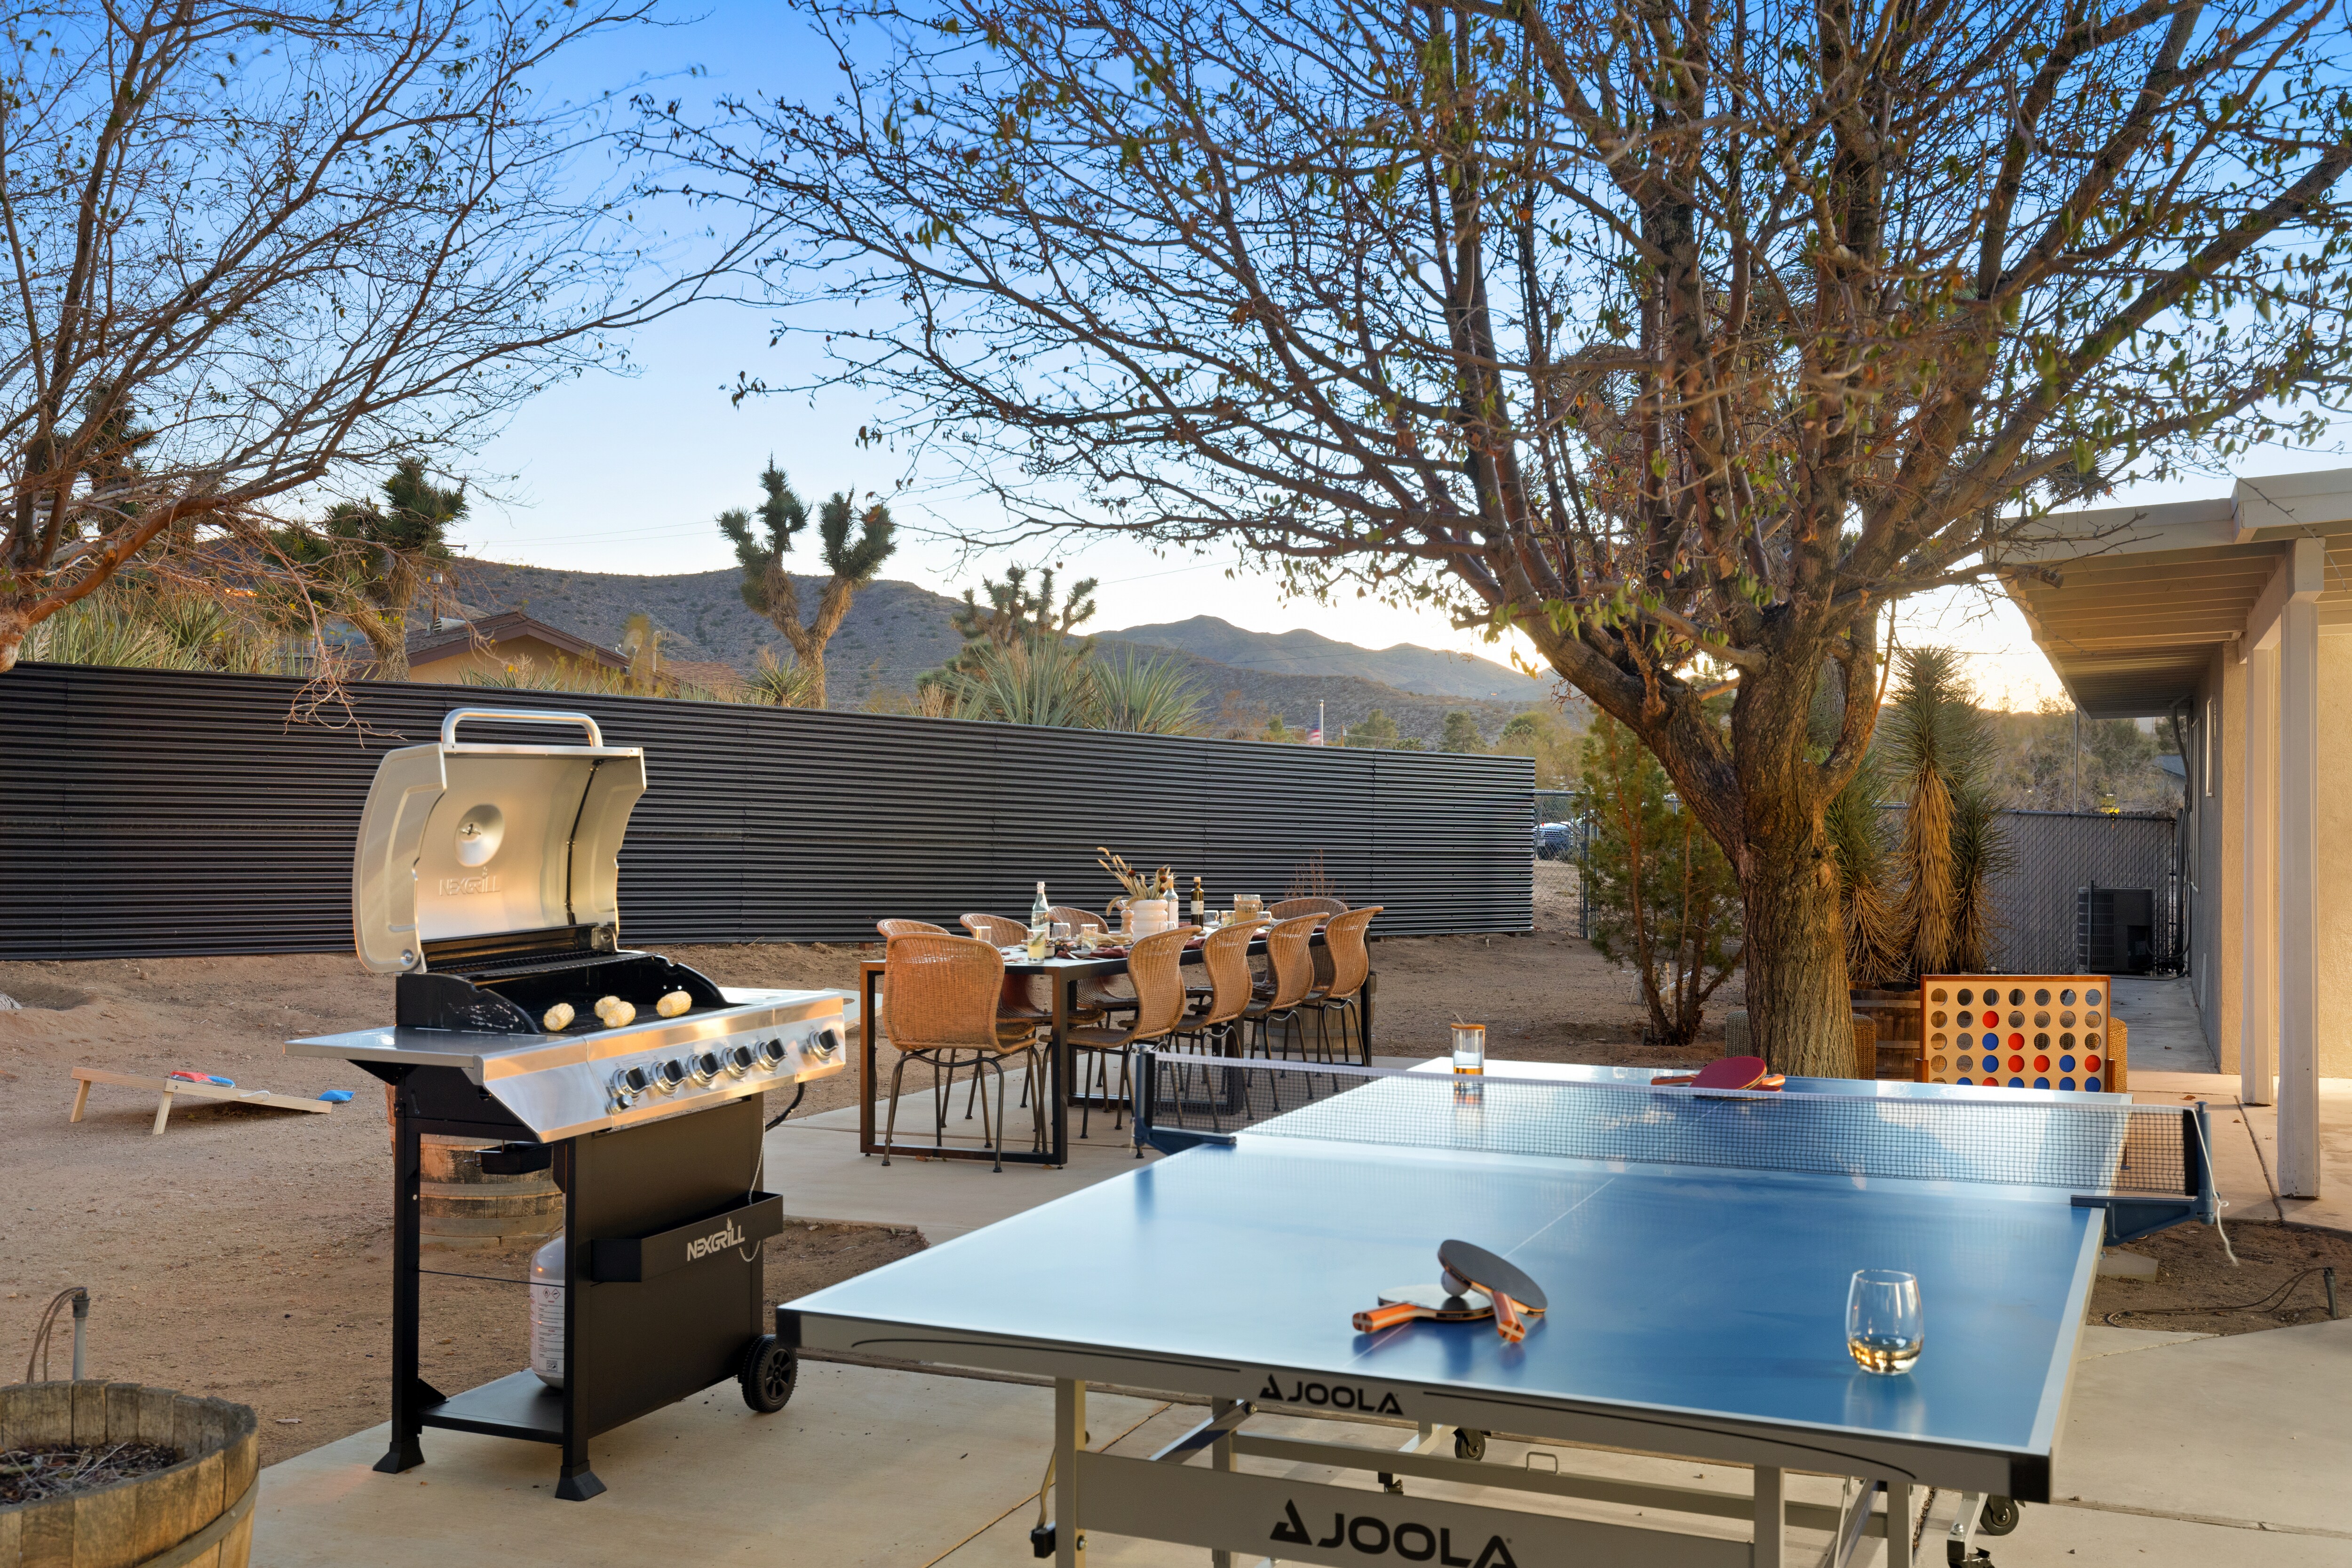 Fire up the grill and play ping pong!